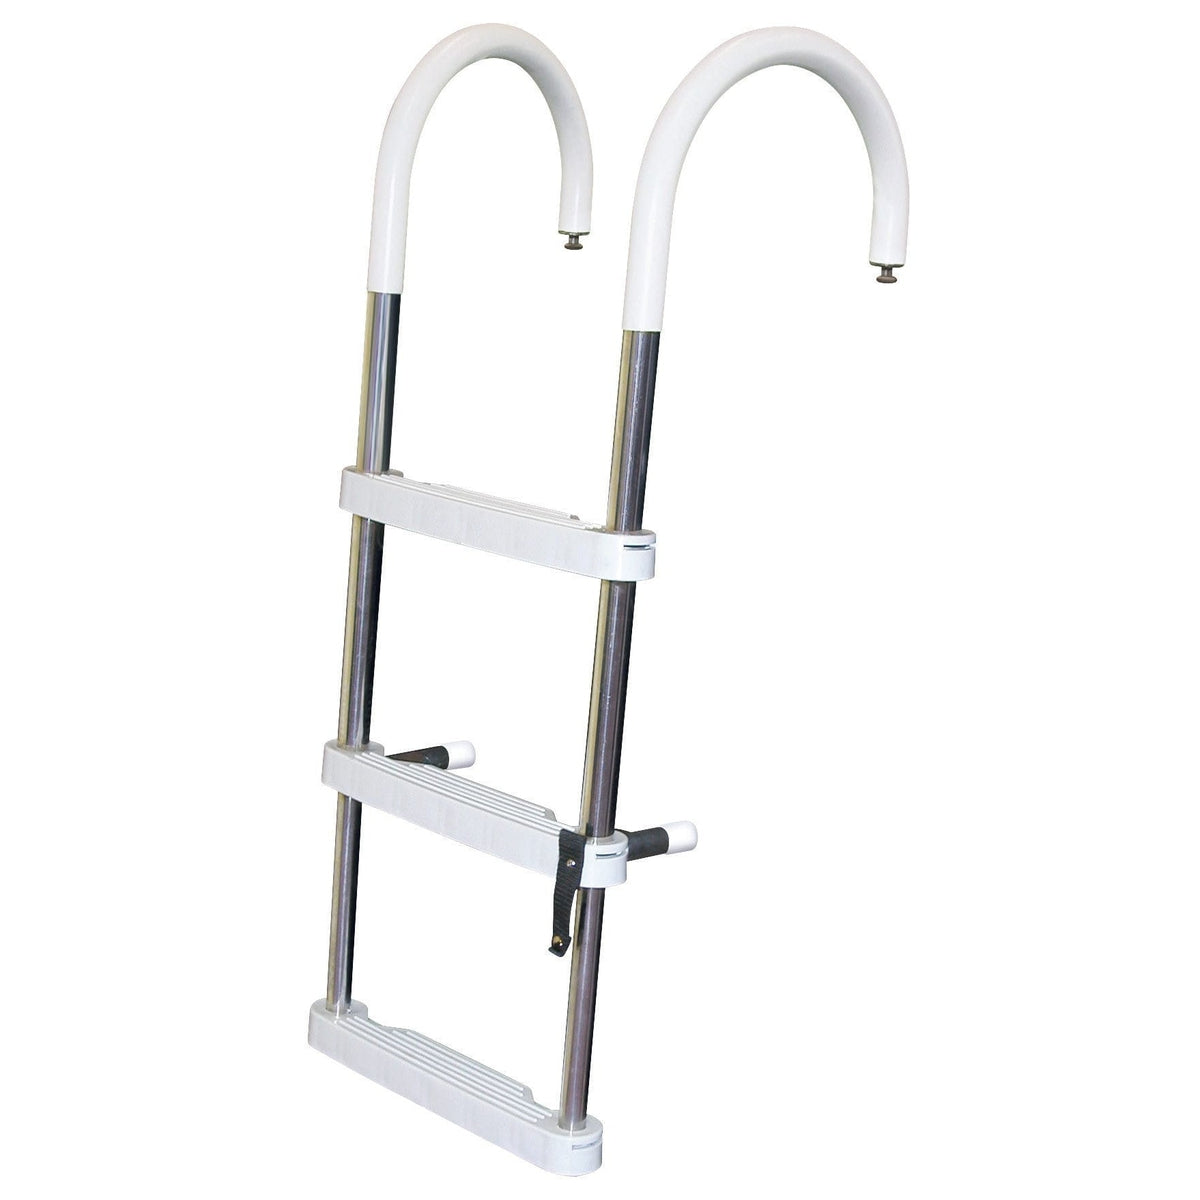 JIF Marine Products Not Qualified for Free Shipping JIF Marine Products 3-Step Telescoping Pontoon Ladder #DUF3